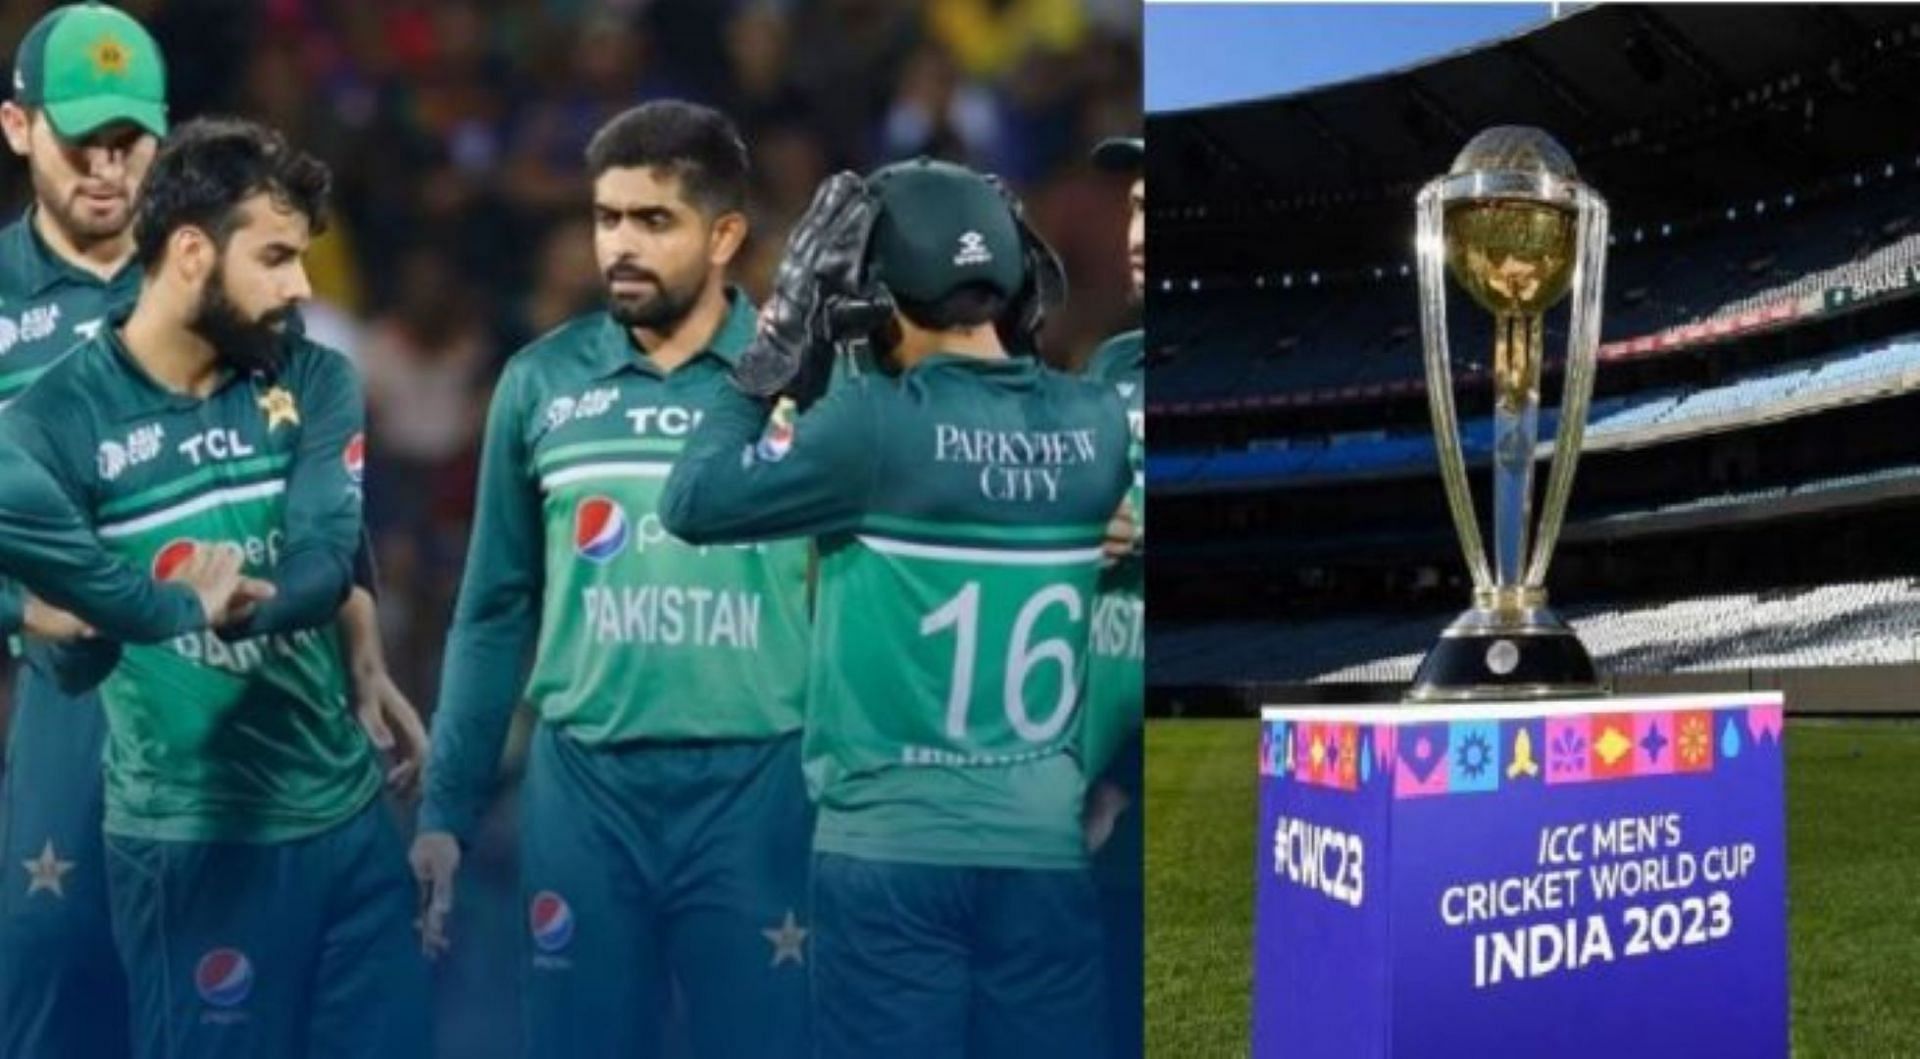 Babar Azam will look to lead Pakistan to a second ODI World Cup title.